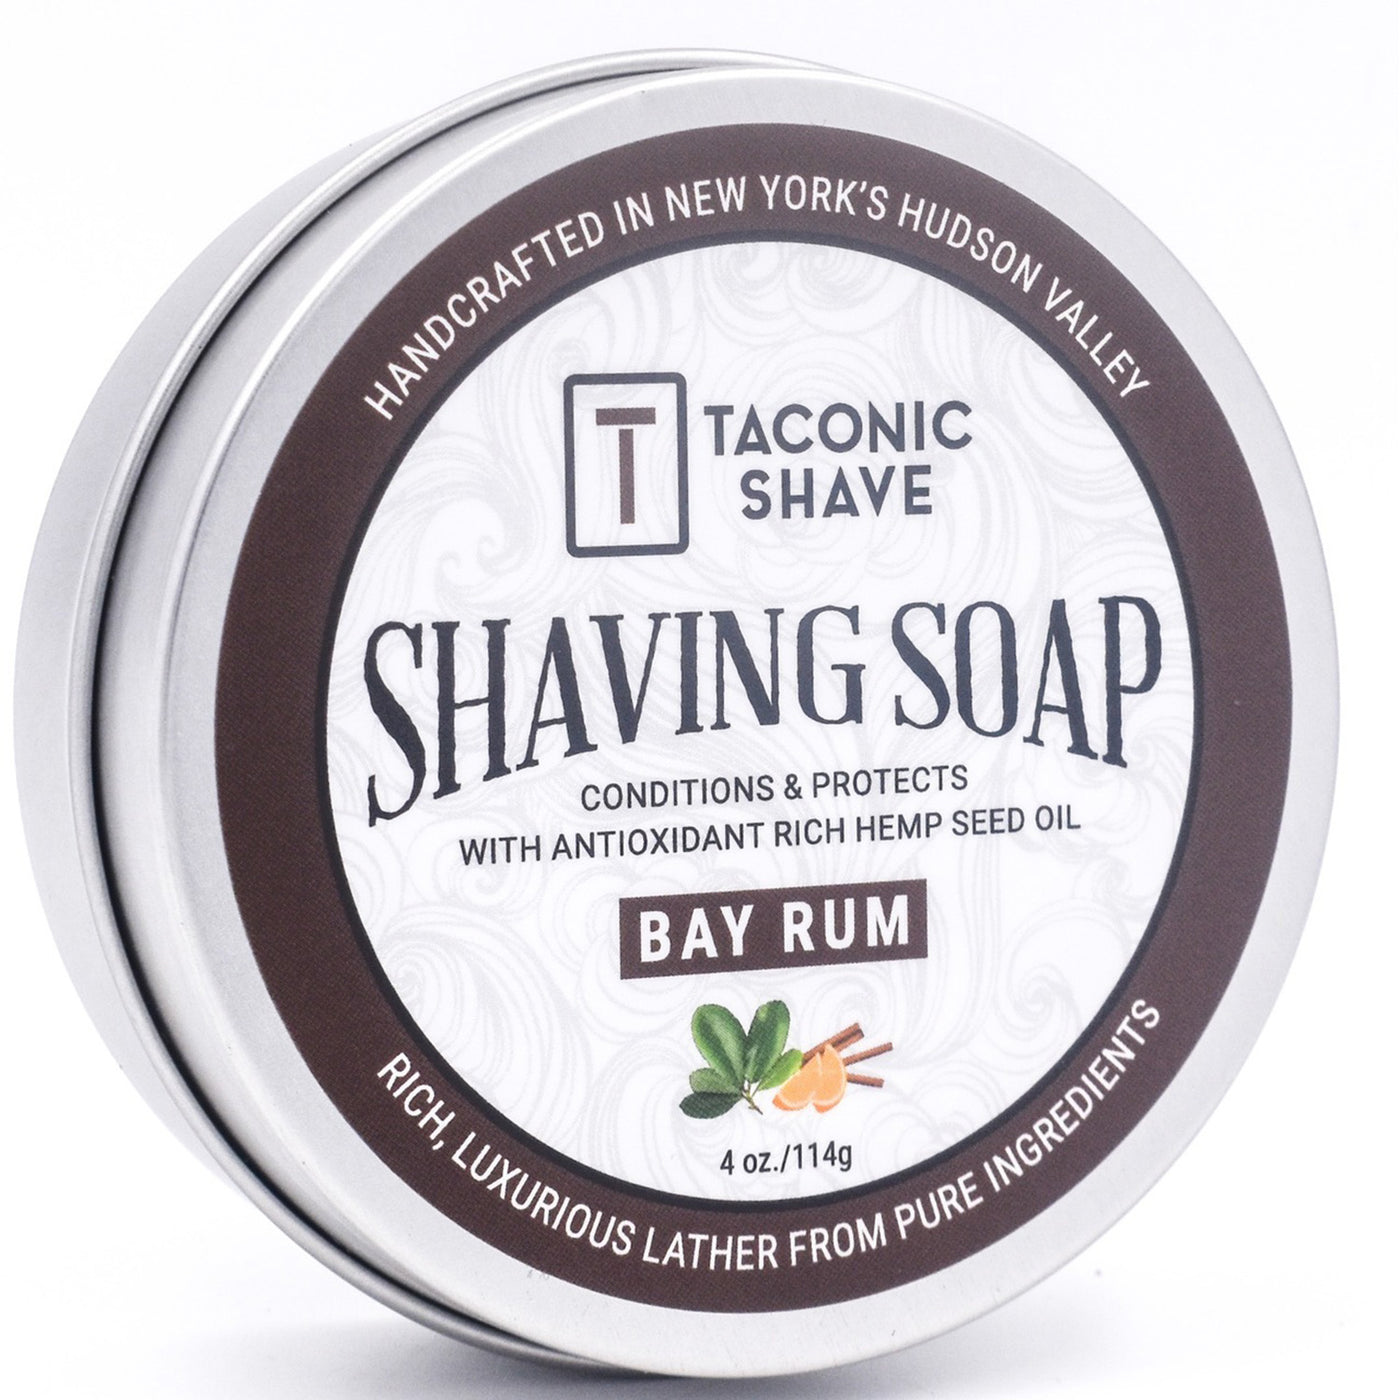  Taconic Shave Bay Rum Gift Set by Taconic Shave sold by Naked Armor Razors